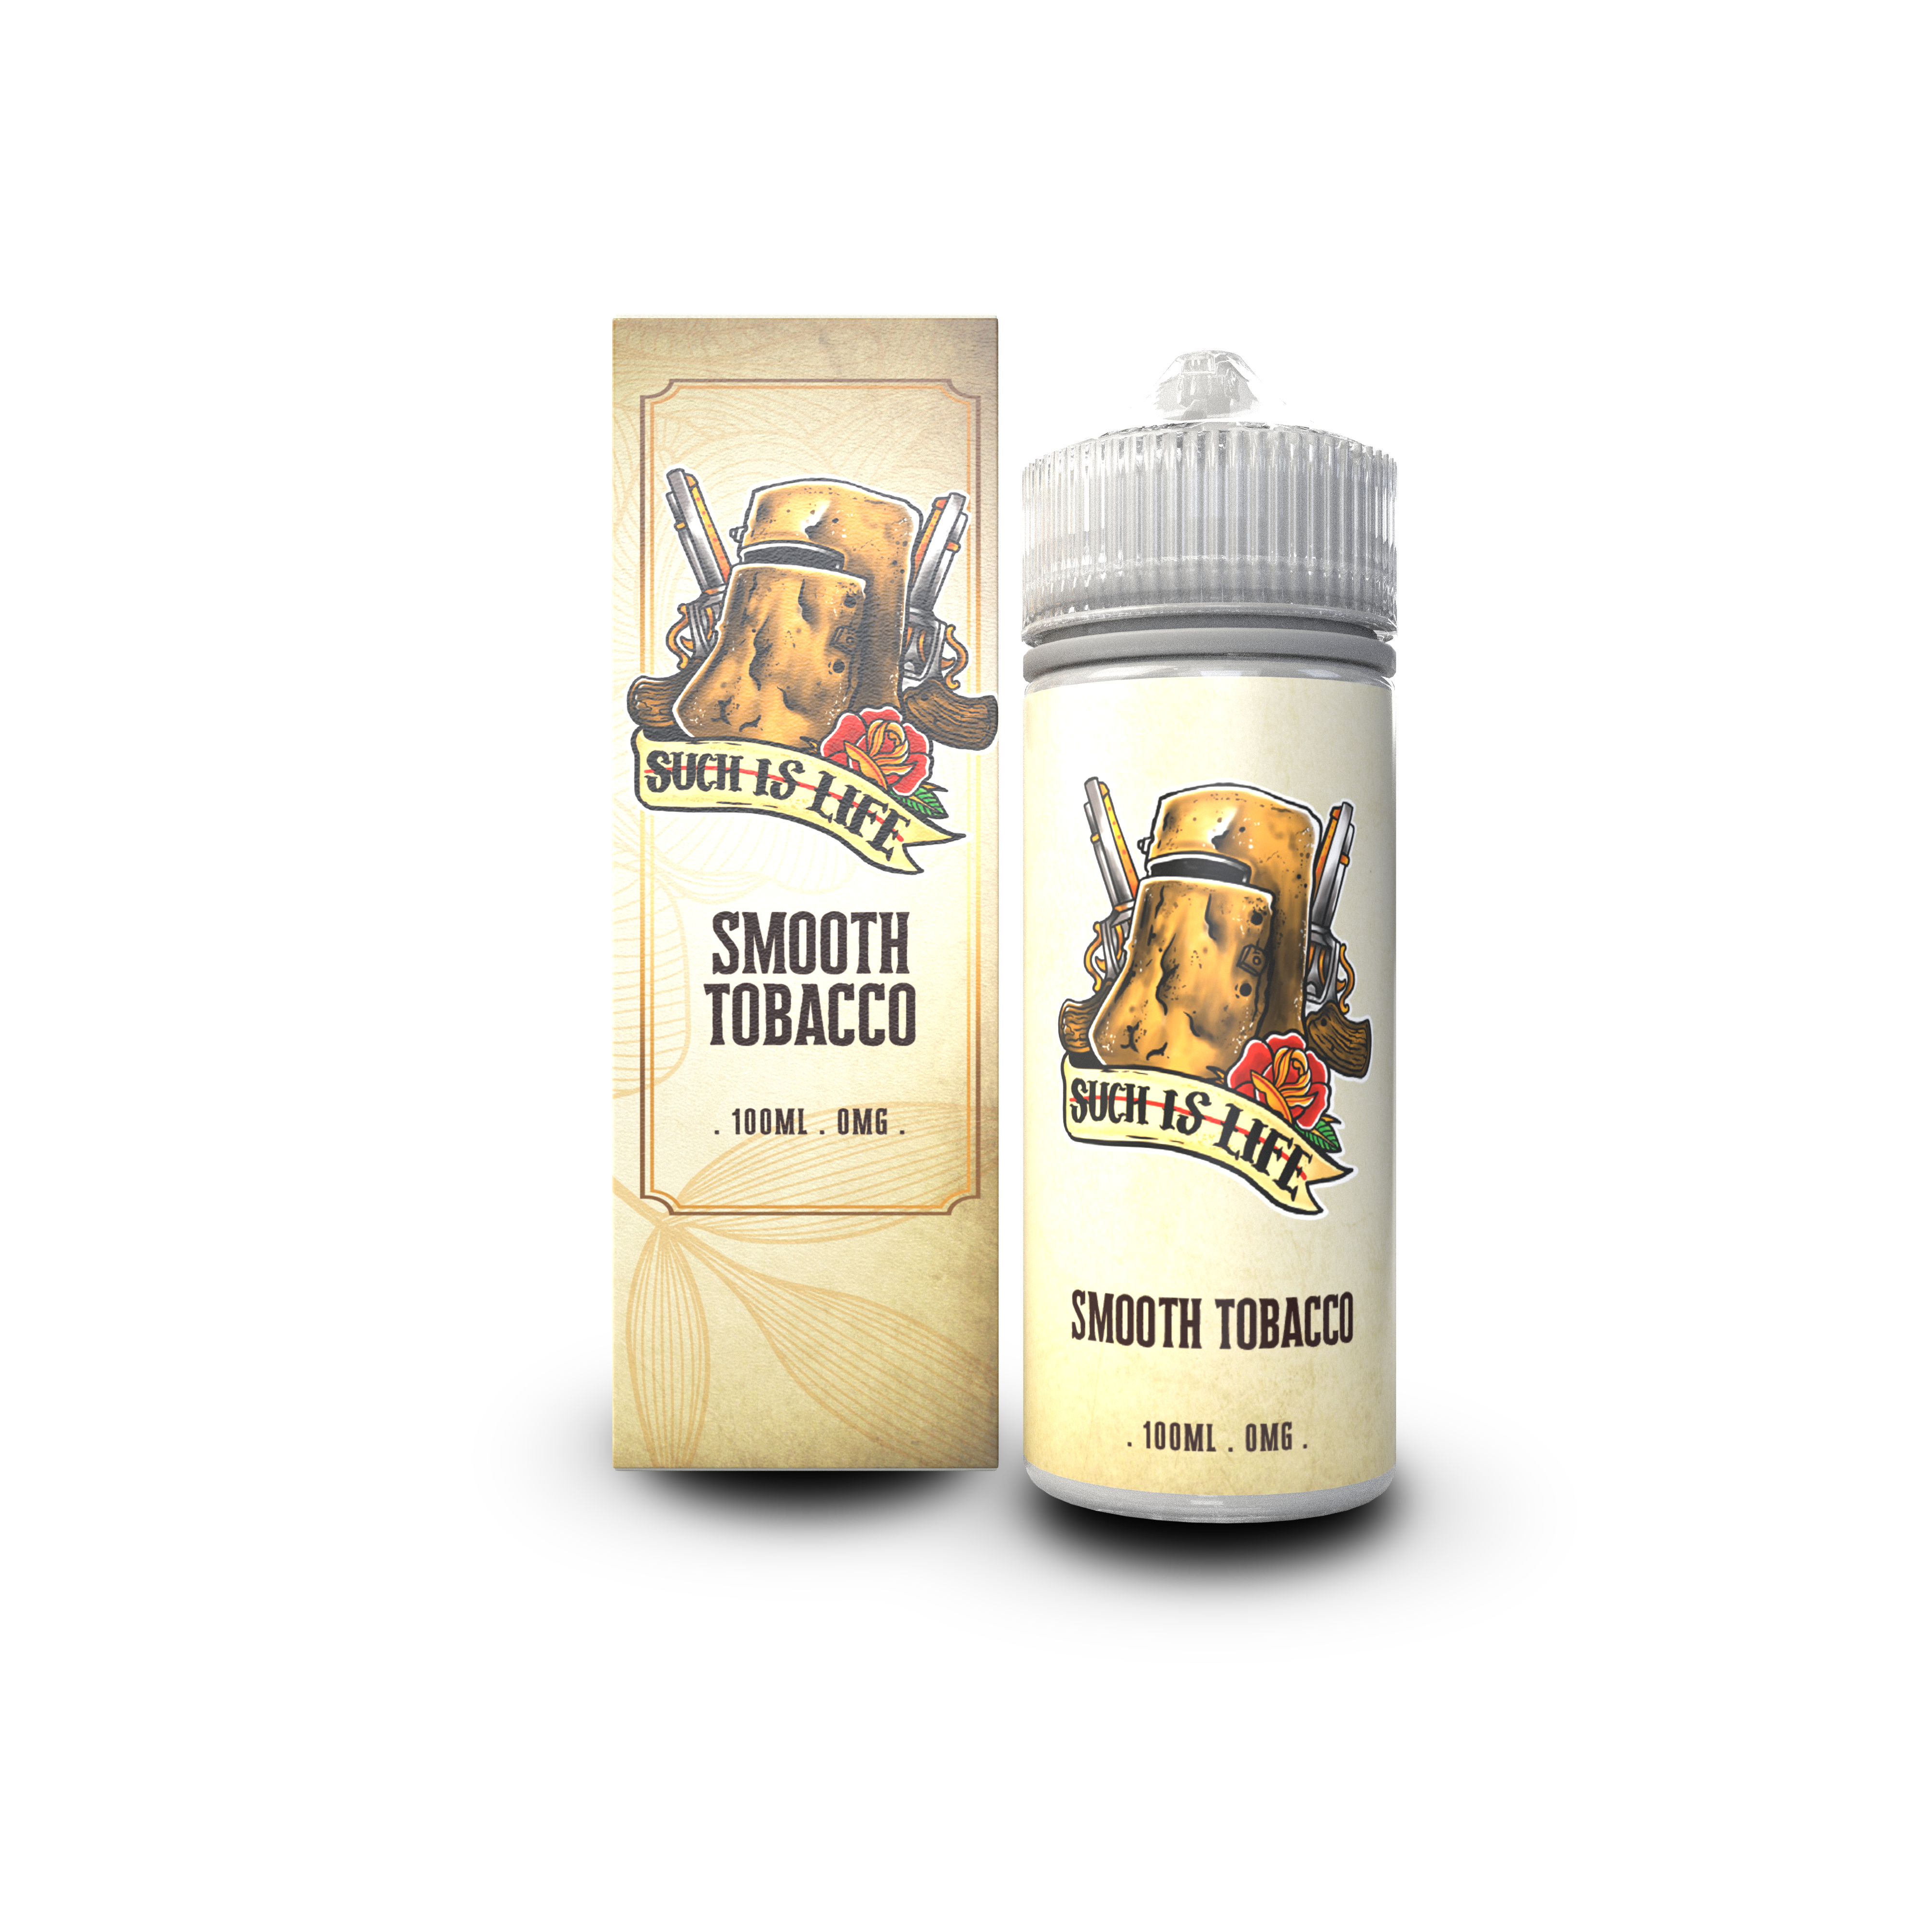 Such is Life | 30ml | Smooth I Australian Wholesale